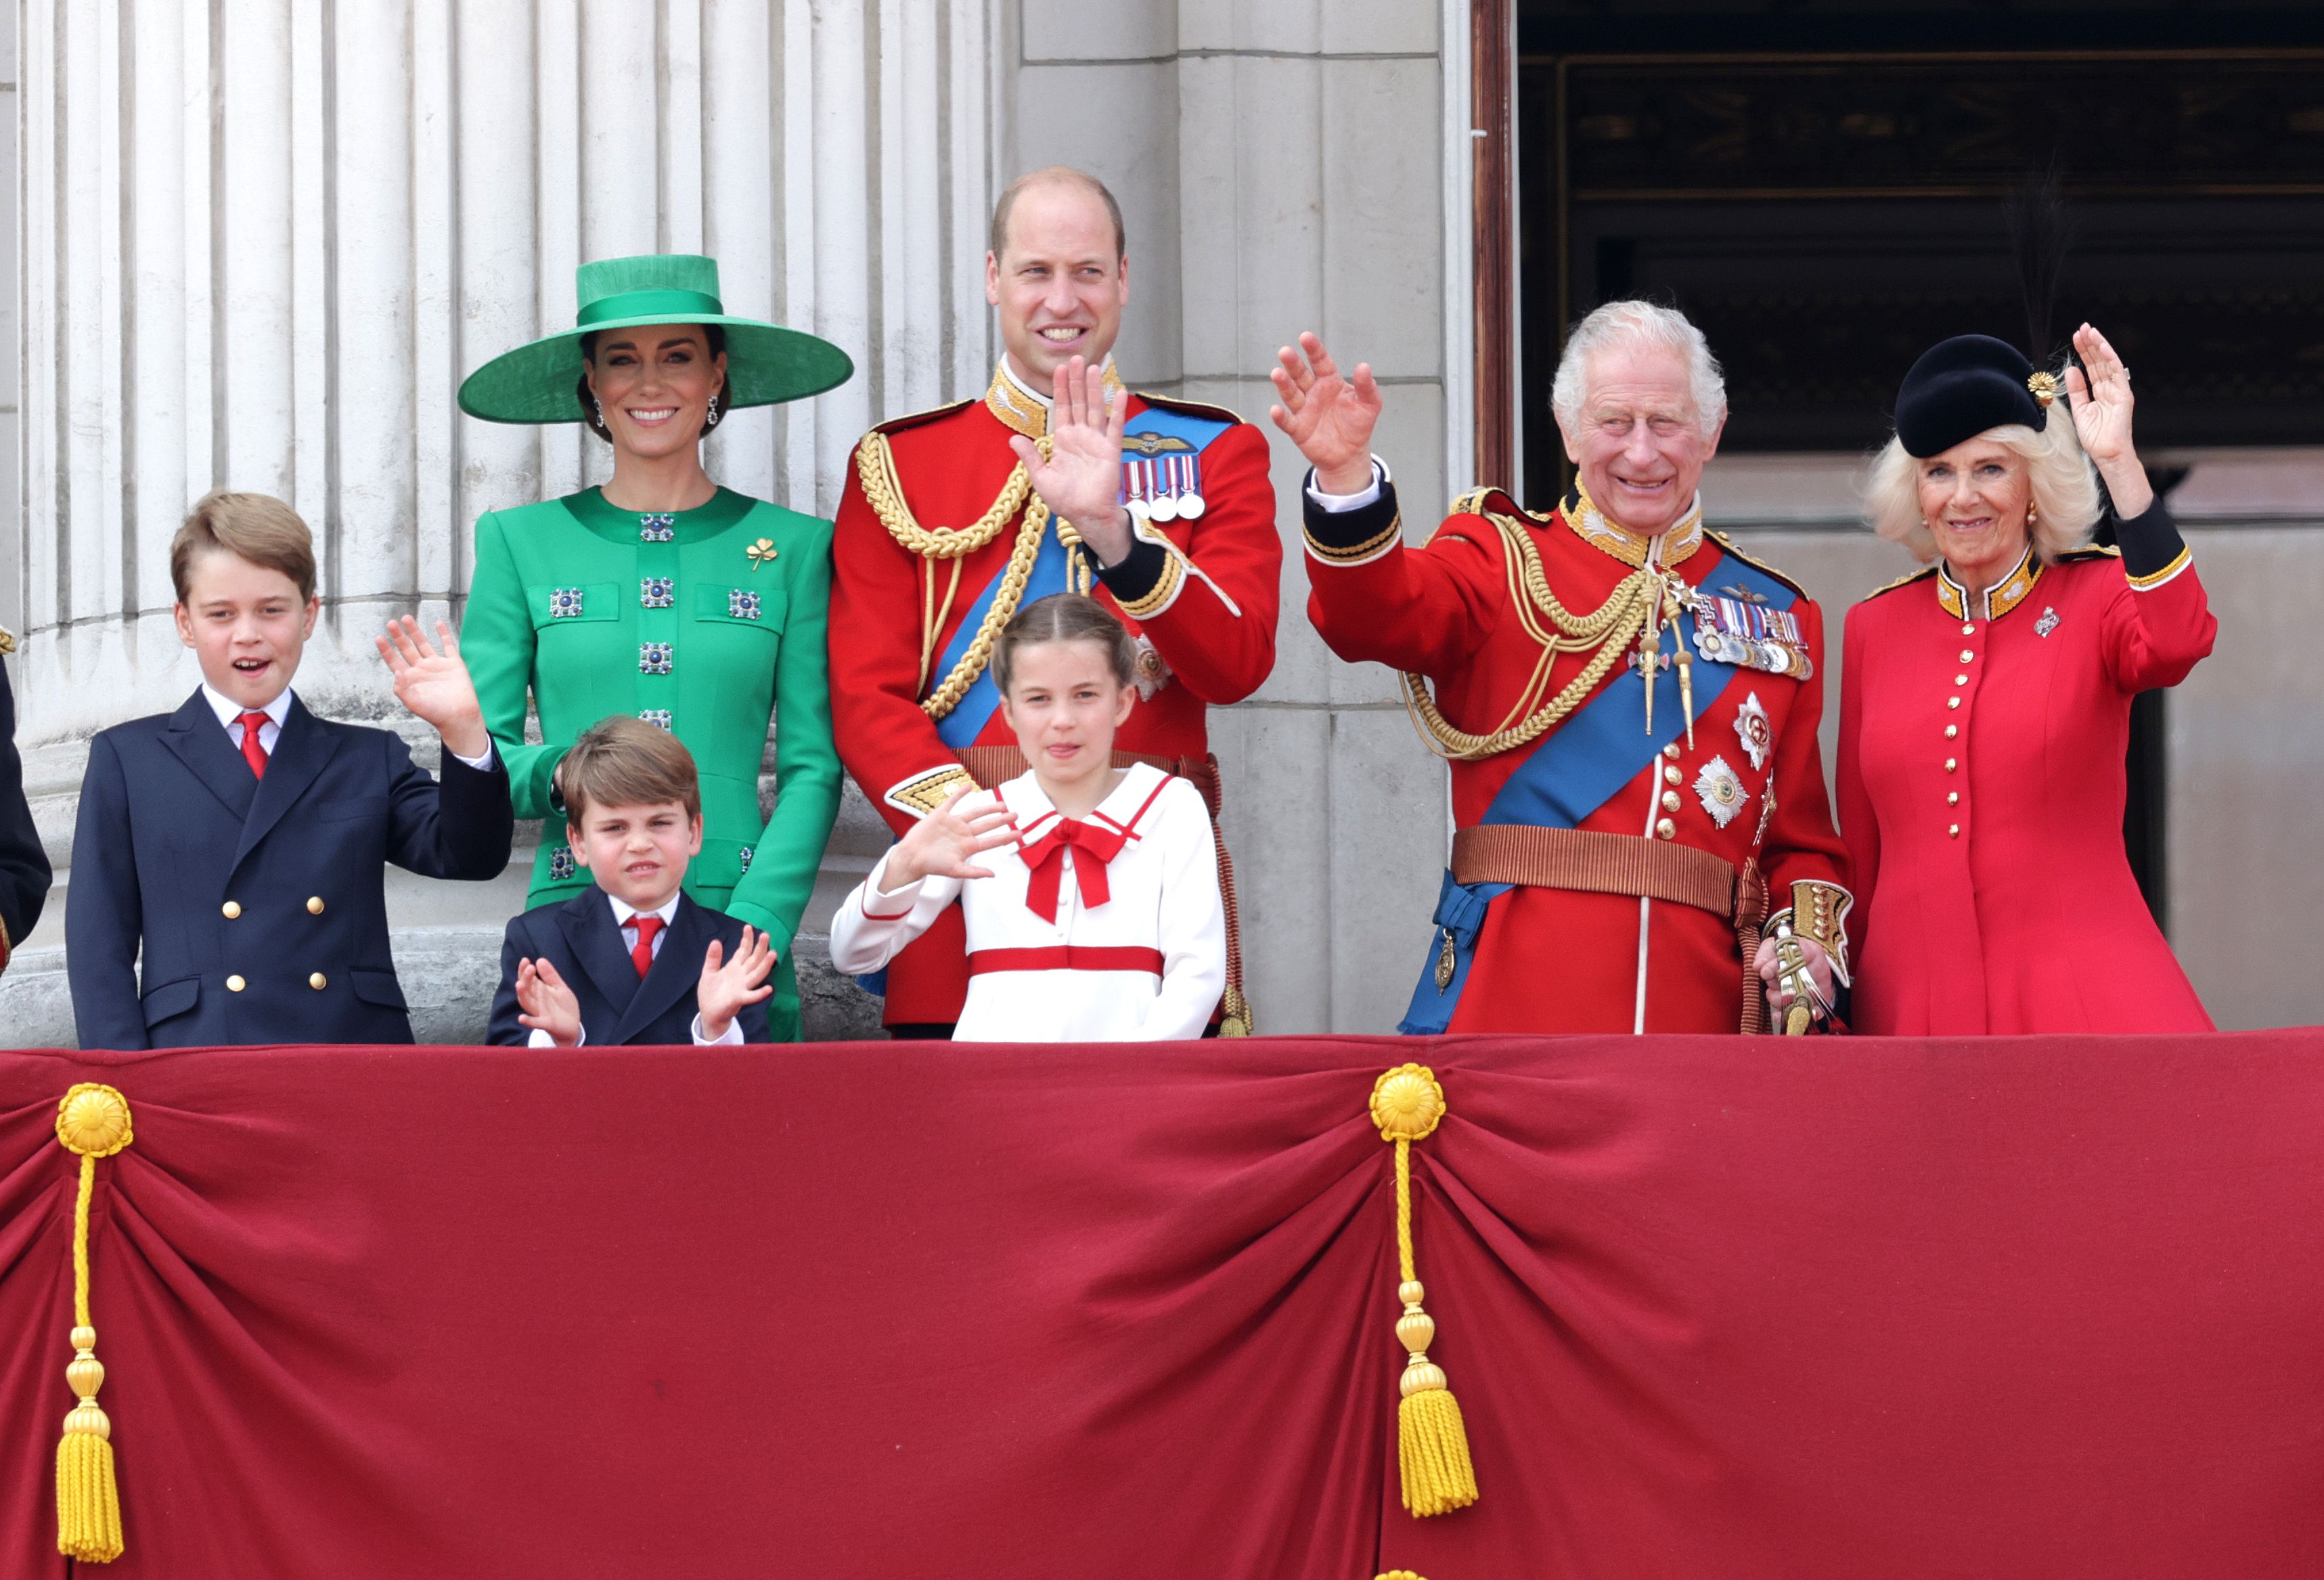 king charles iii and queen camilla wave alongside prince news photo 1689878558